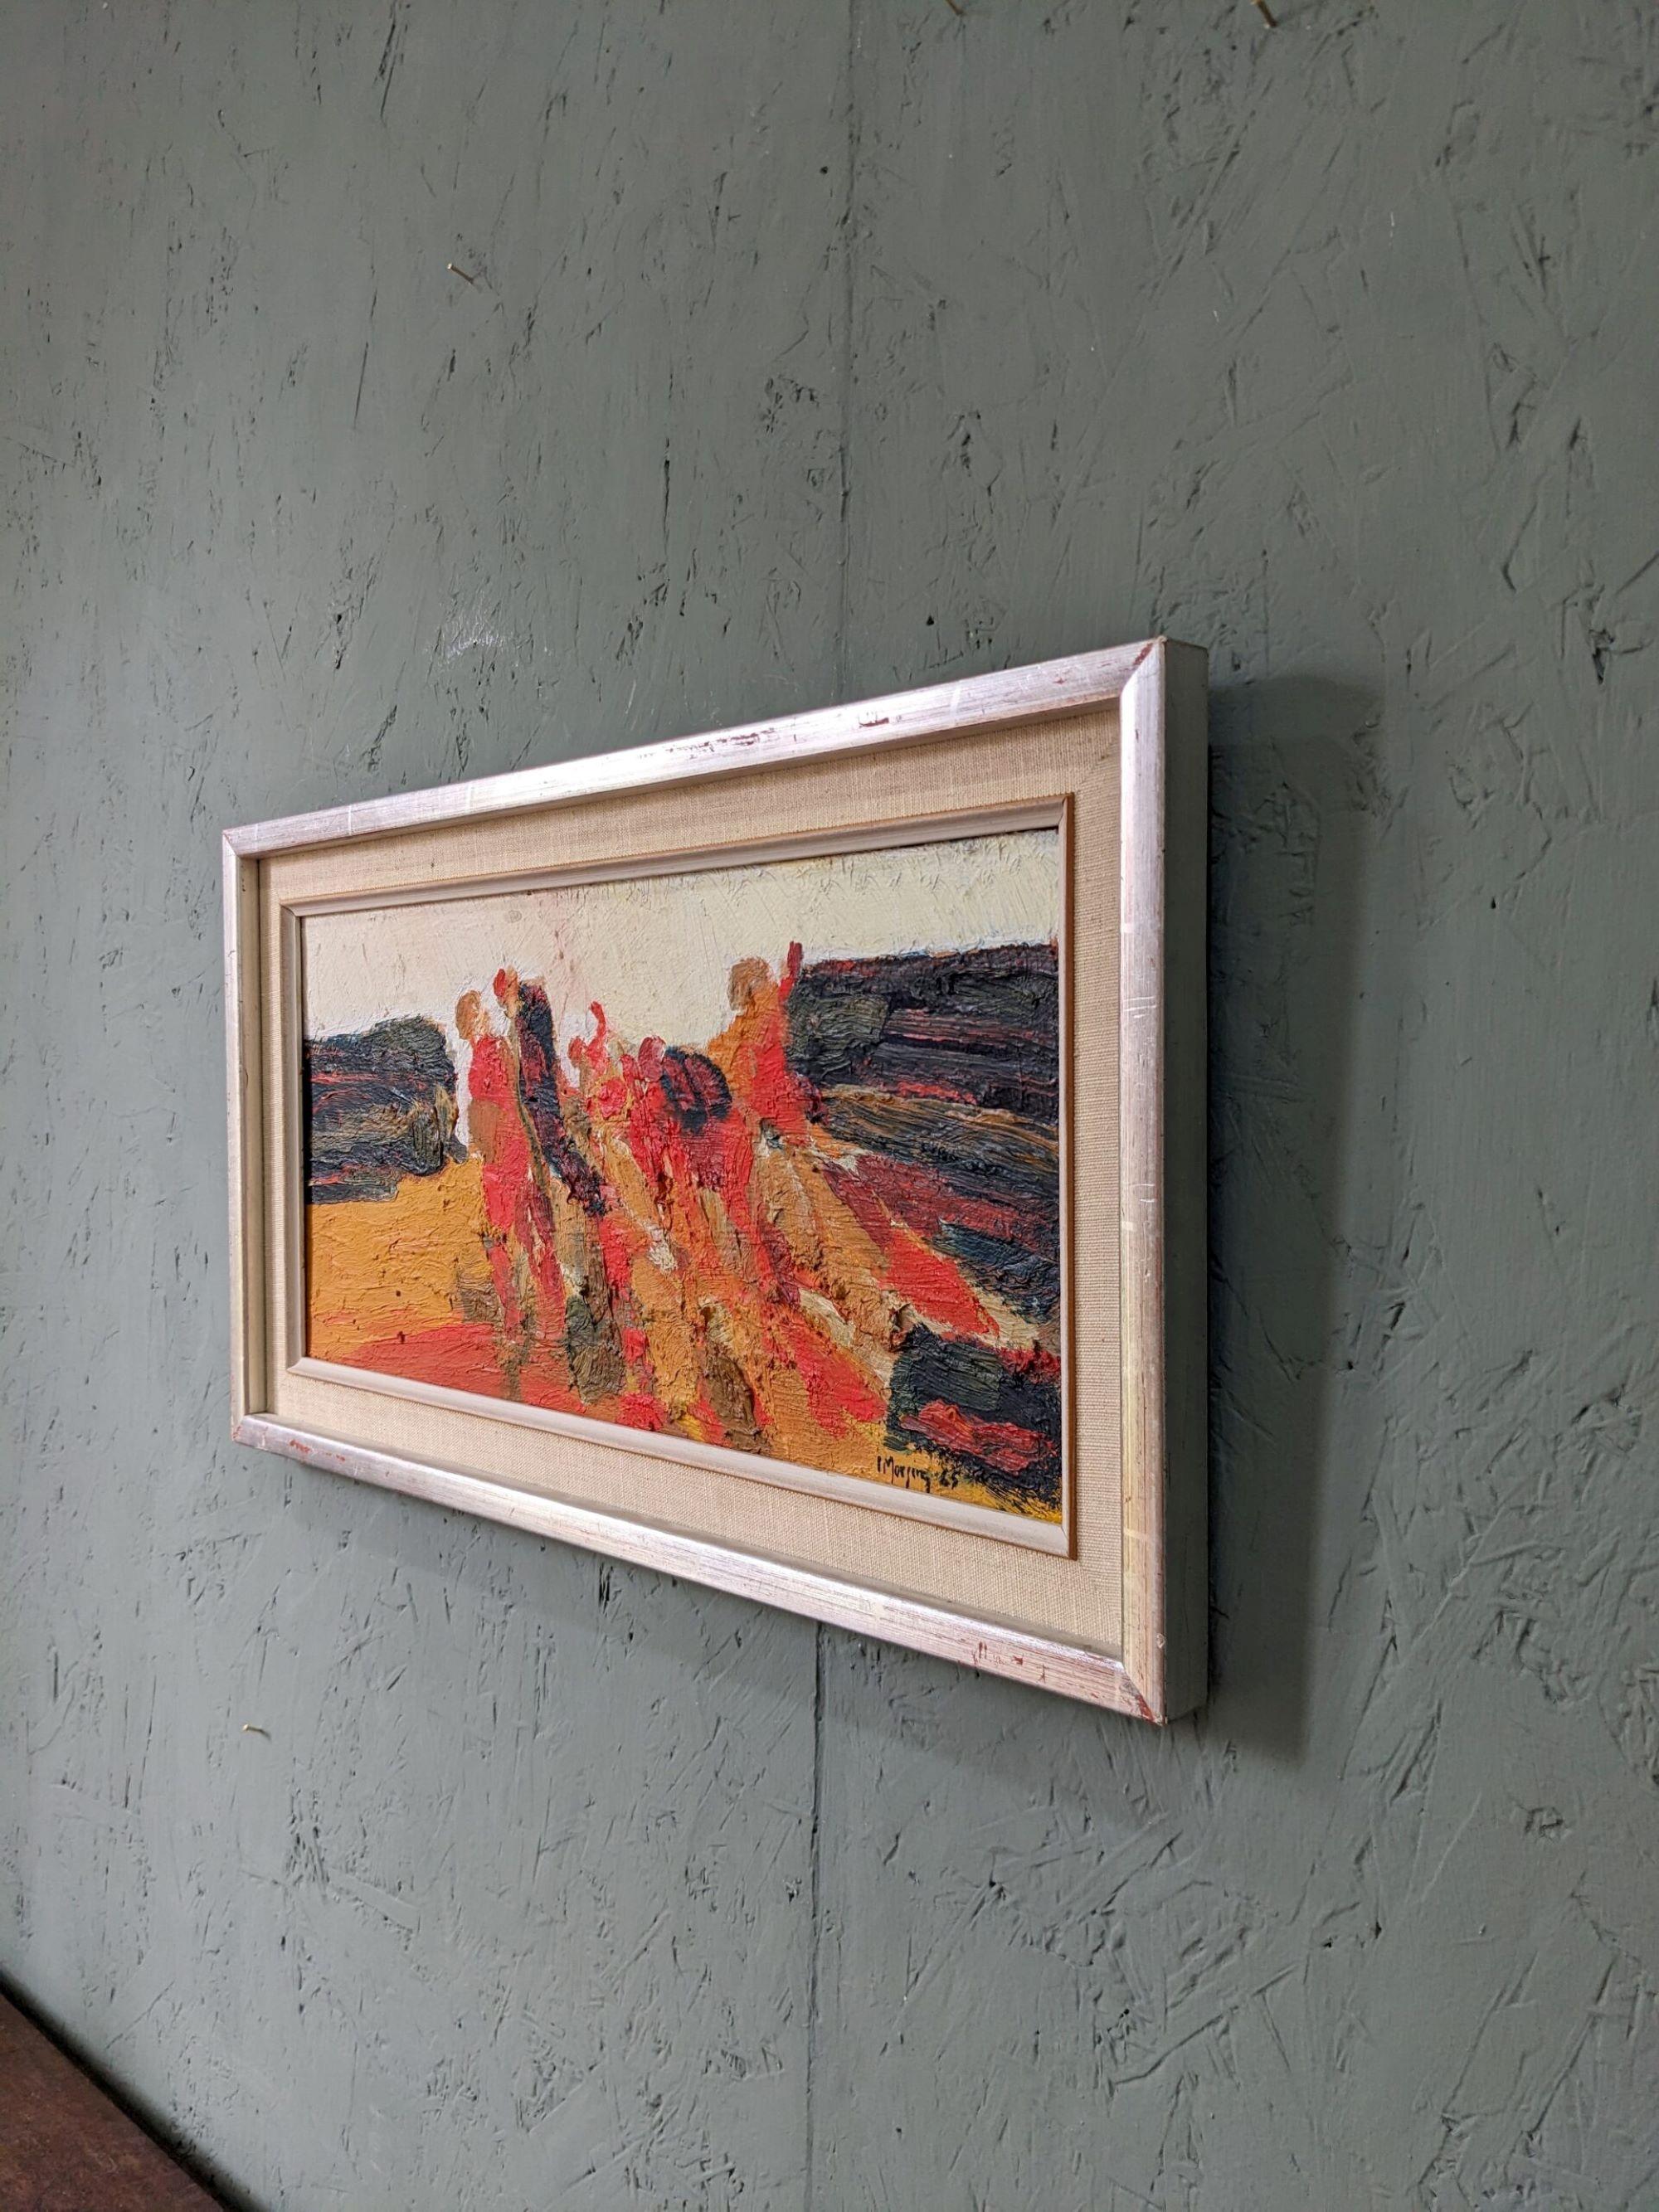 CONNECTION
Size: 26 x 47 cm (including frame)
Oil on board

A brilliantly executed and beautifully textured abstract figurative oil composition, painted in 1965 by the established Swedish artist Ivar Morsing (1919-2009), whose works have been